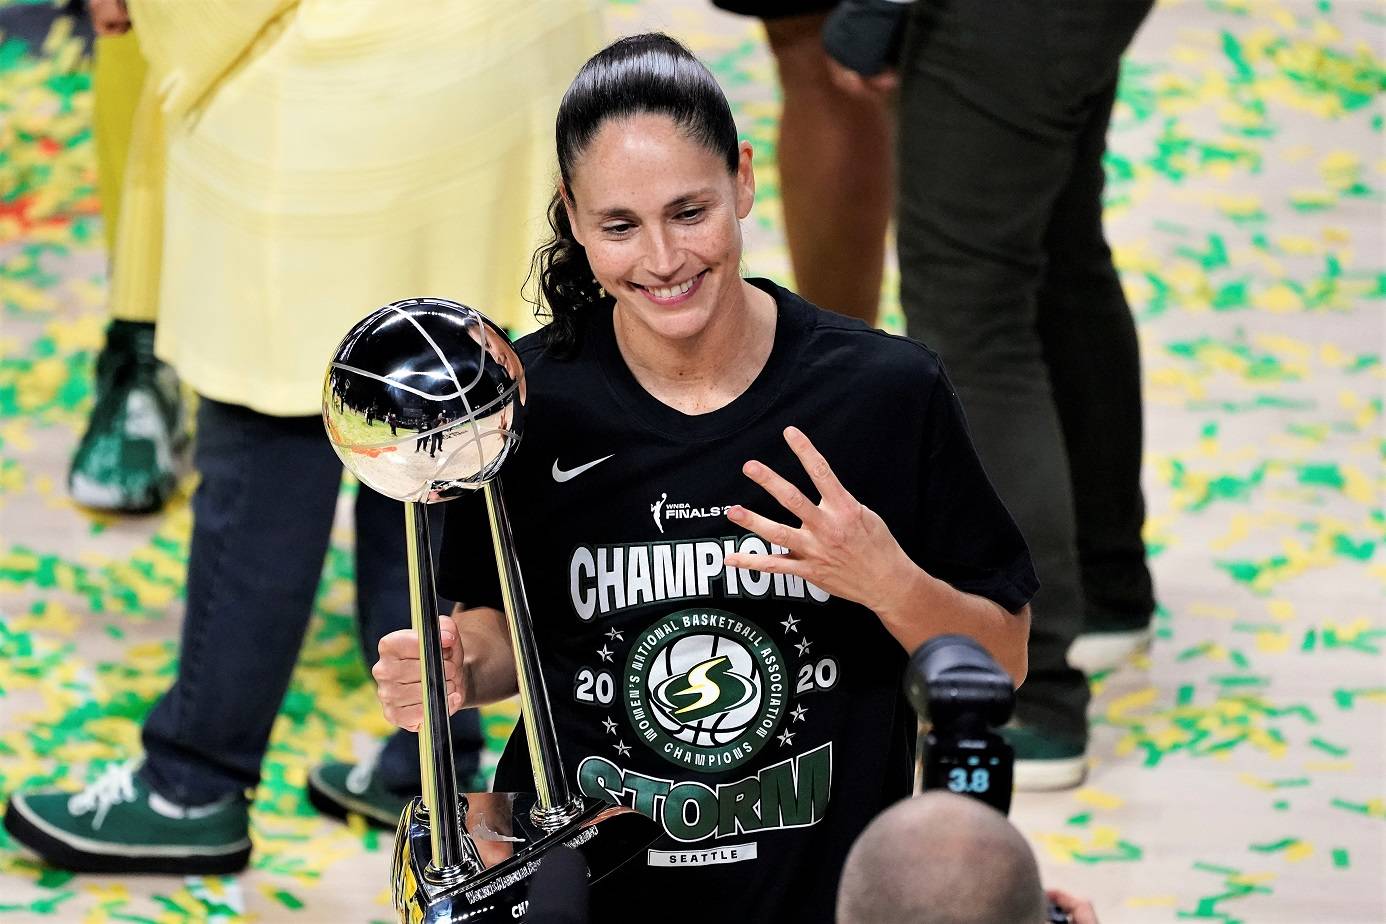 Seattle Storm guard Sue Bird poses for a photo after the team won the WNBA Championship on Tuesday in Bradenton, Fla. (Chris O’Meara/Associated Press)